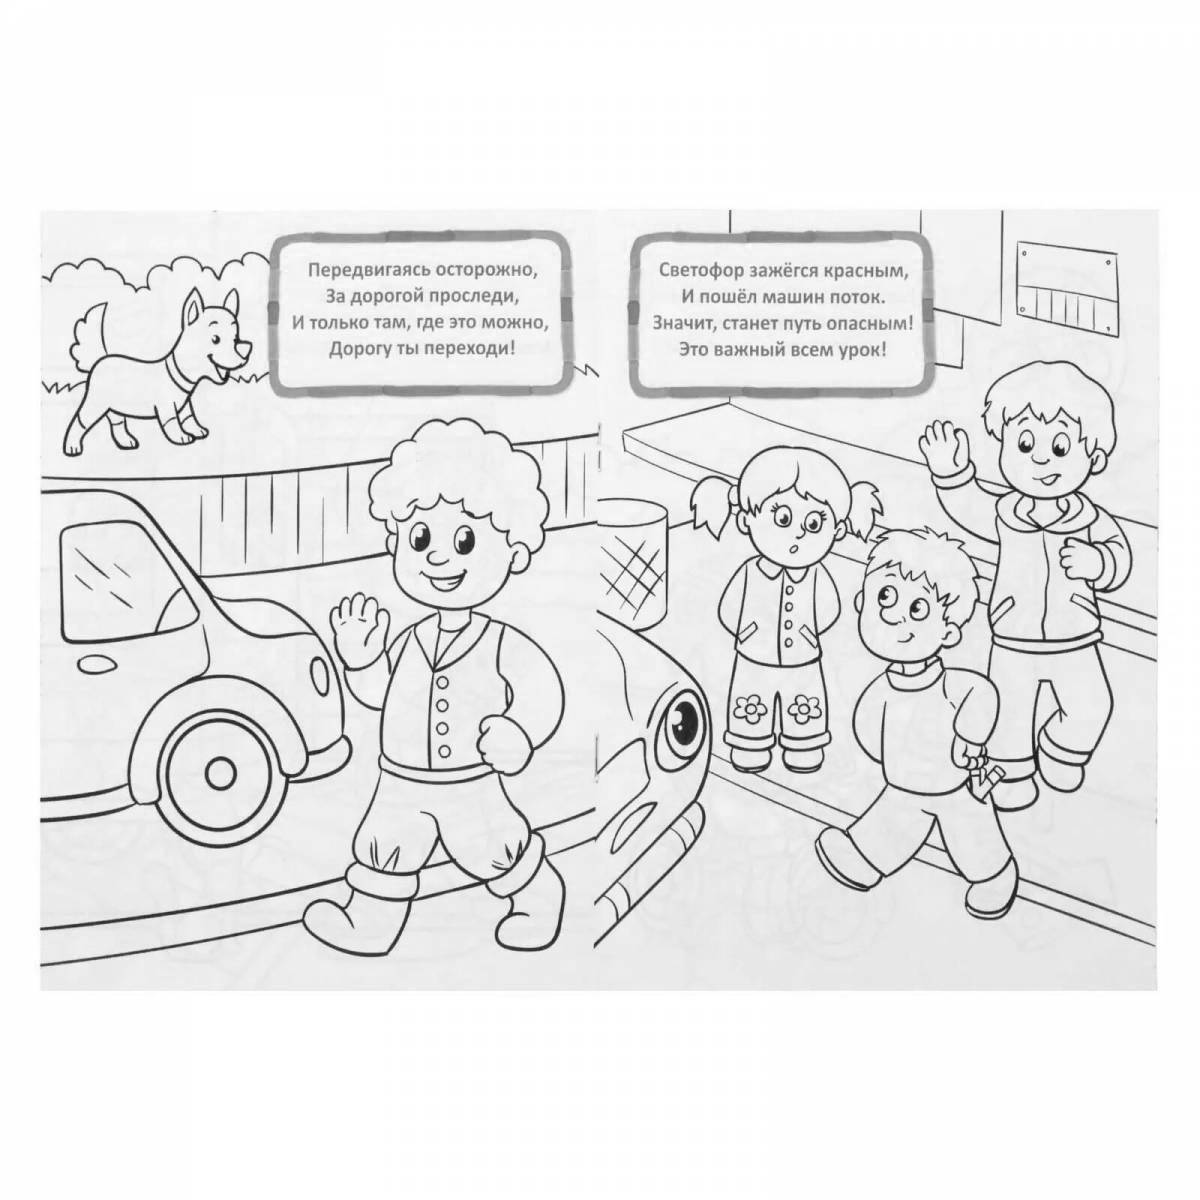 According to traffic rules for preschoolers preparatory group #12